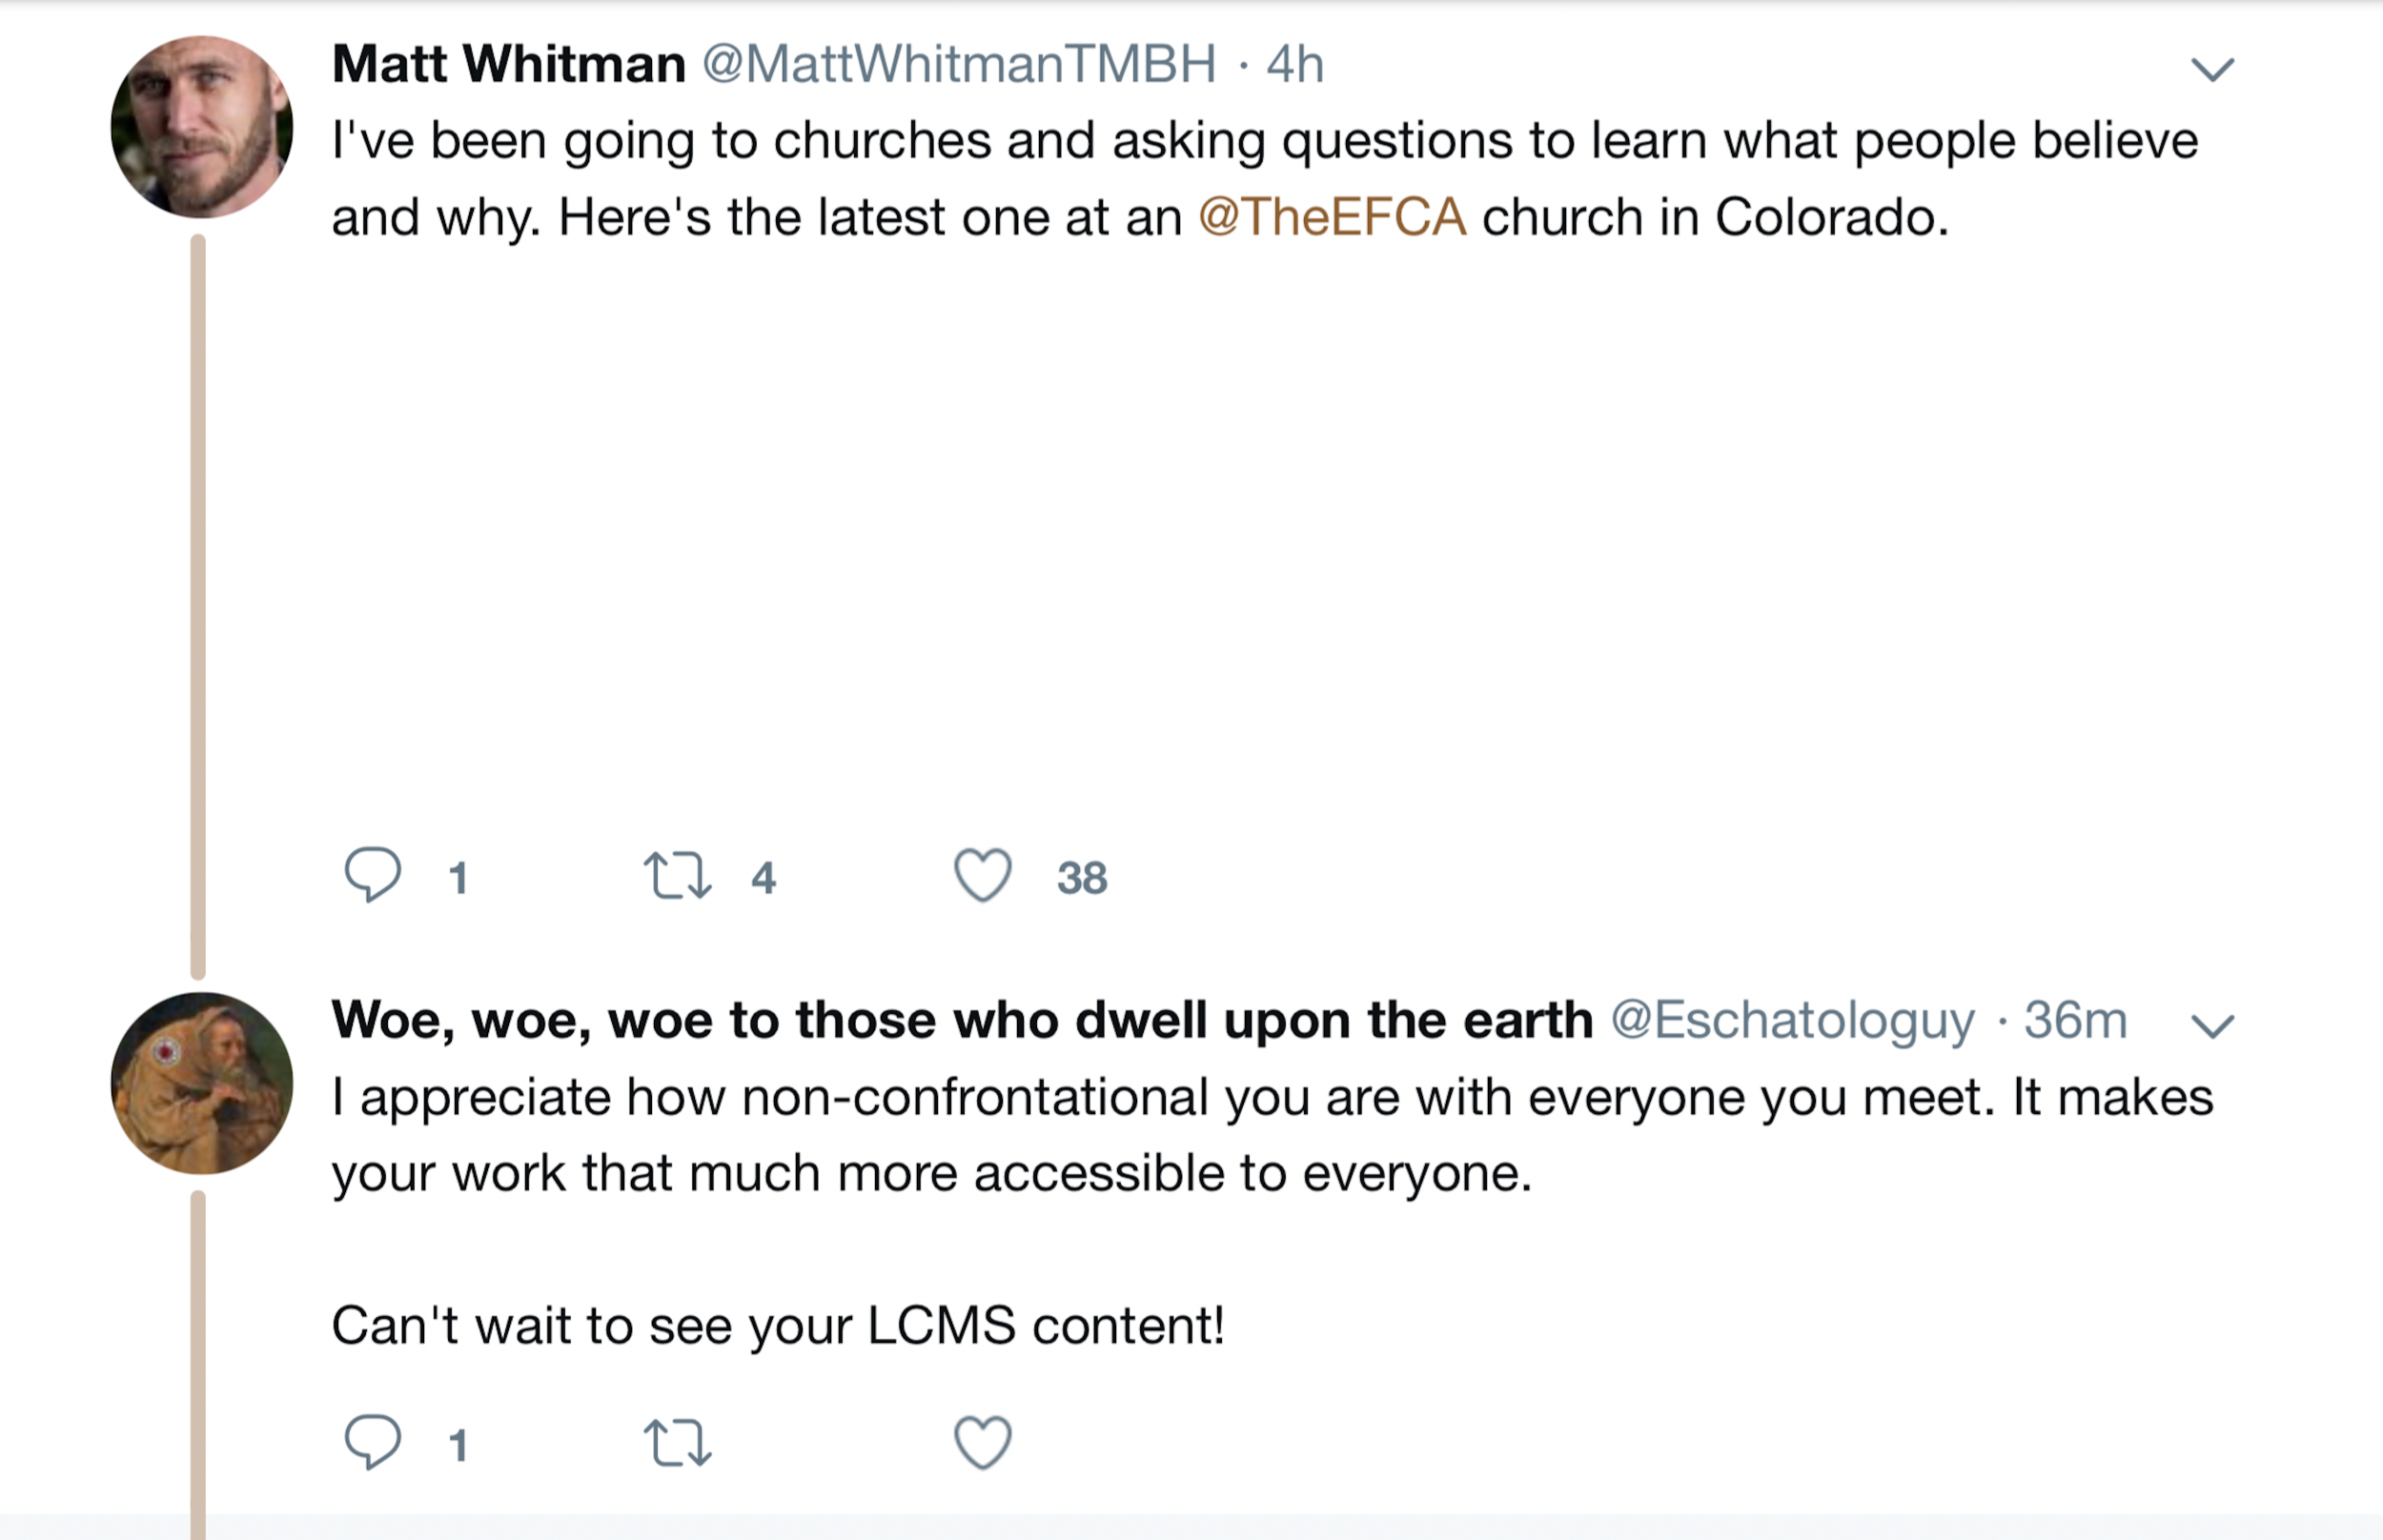 Matt Whitman: "I've been going to churches and asking questions to learn what people believe and why. Here's the latest one at an @theEFCA church in Colorado." Woe as Eschatologuy responds: "I appreciate how non-confrontational you are with everyone you meet. It makes your work that much more accessible to everyone. Can't wait to see your LCMS content!"